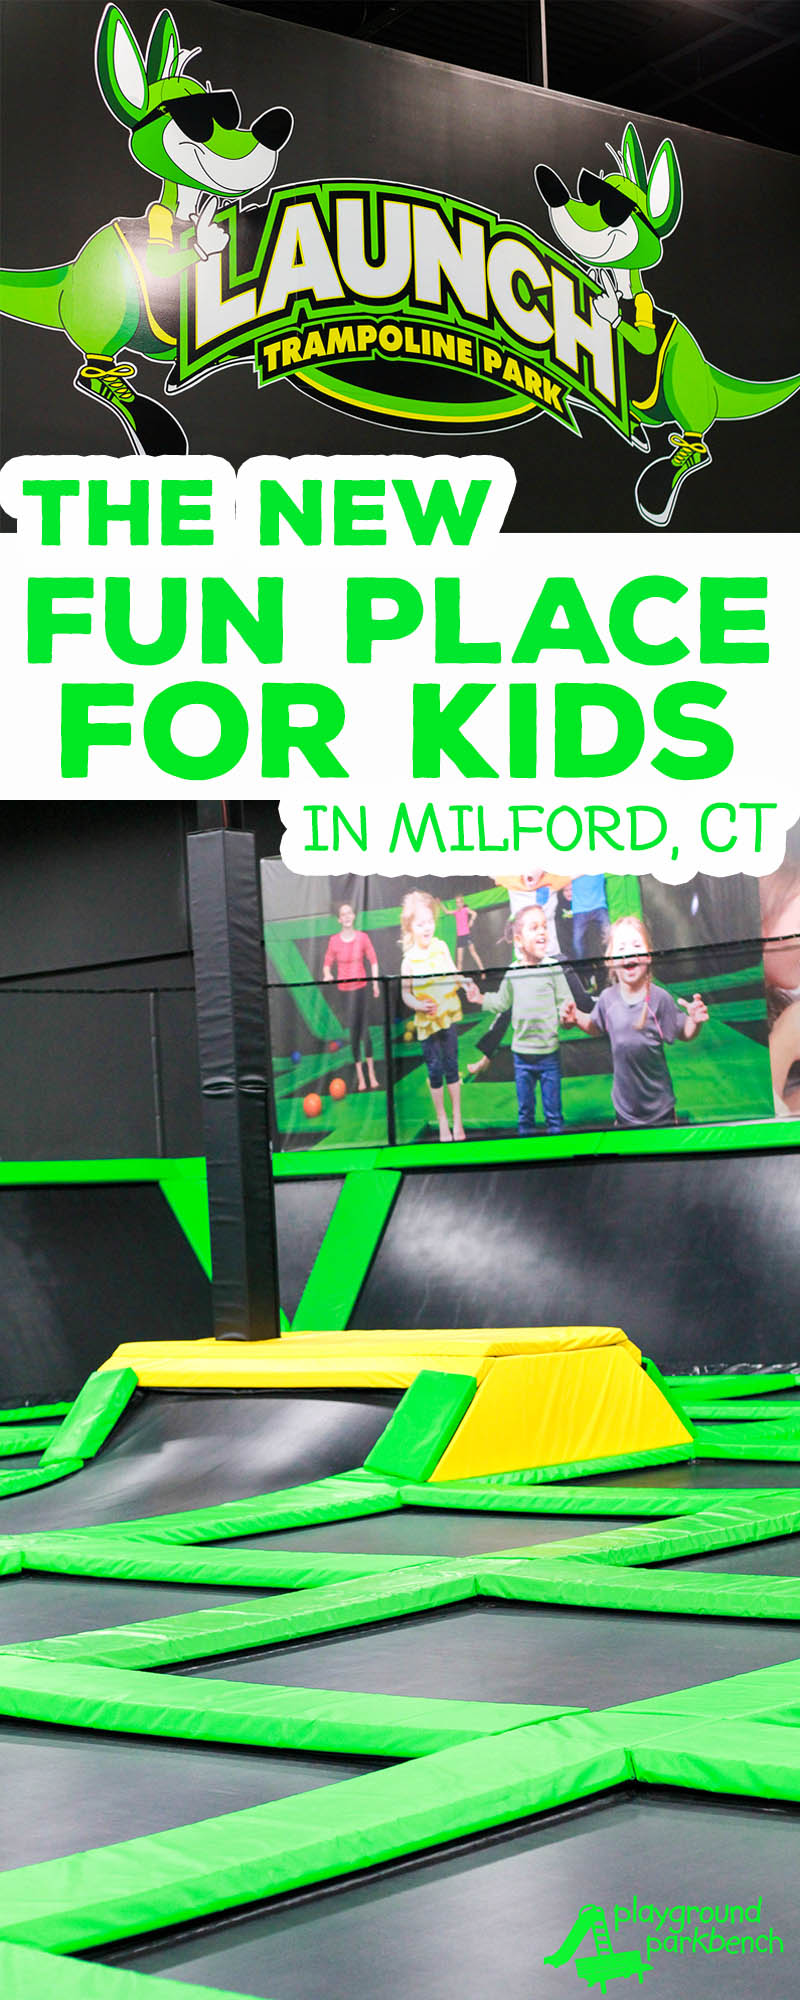 Have you heard about the new trampoline park in Milford, CT? It's a awesome active indoor play place for kids of all ages, with great offerings for toddlers, preschoolers, and even special nights for teens. | Milford, CT | New Haven County CT | Family Fun in Connecticut